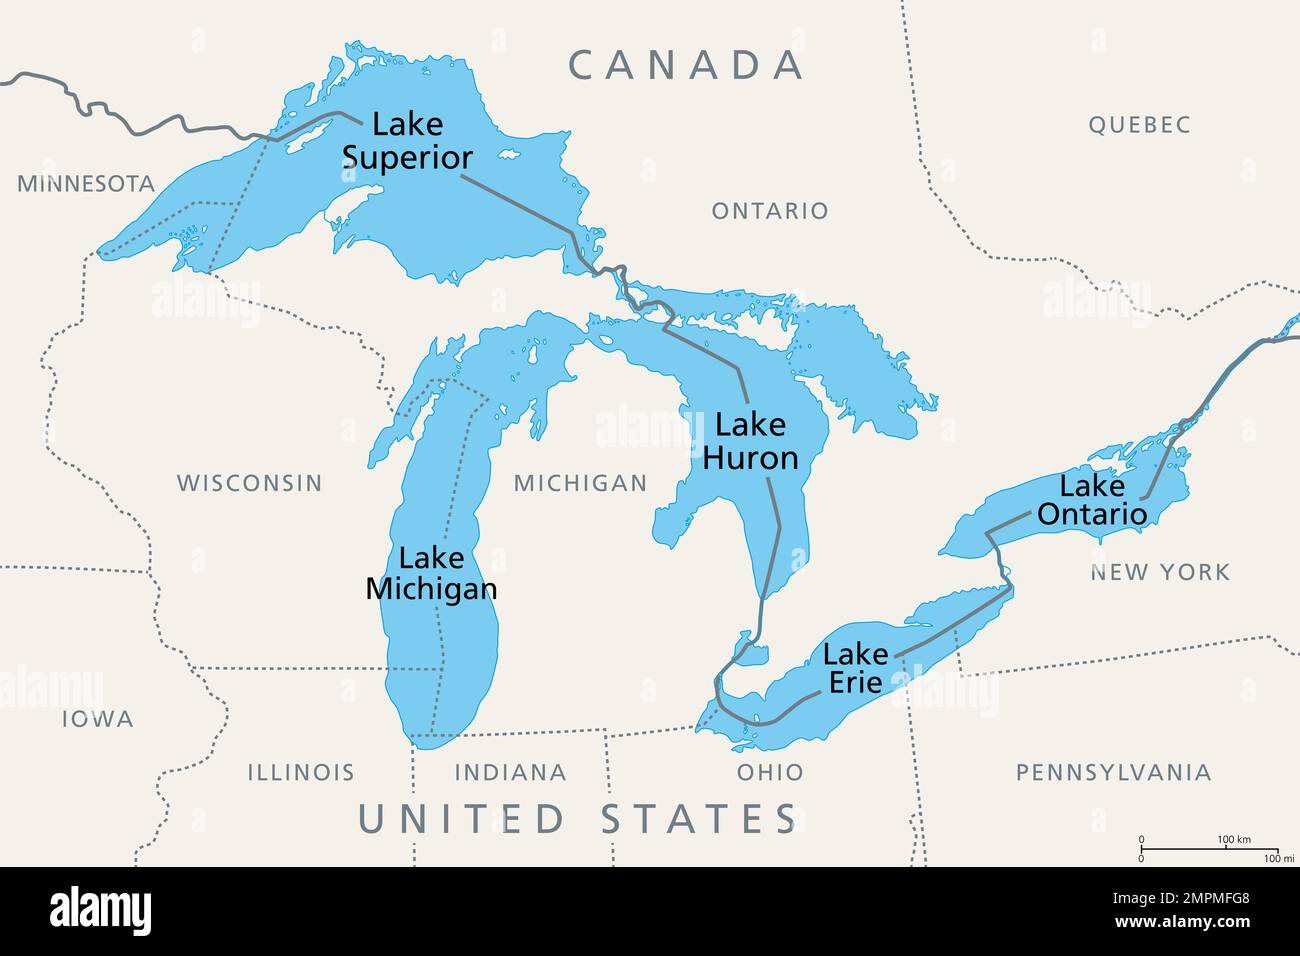 Great Lakes of North America, political map. Lake Superior, Michigan, Huron, Erie and Lake Ontario. A series of large interconnected freshwater lakes. Stock Photo